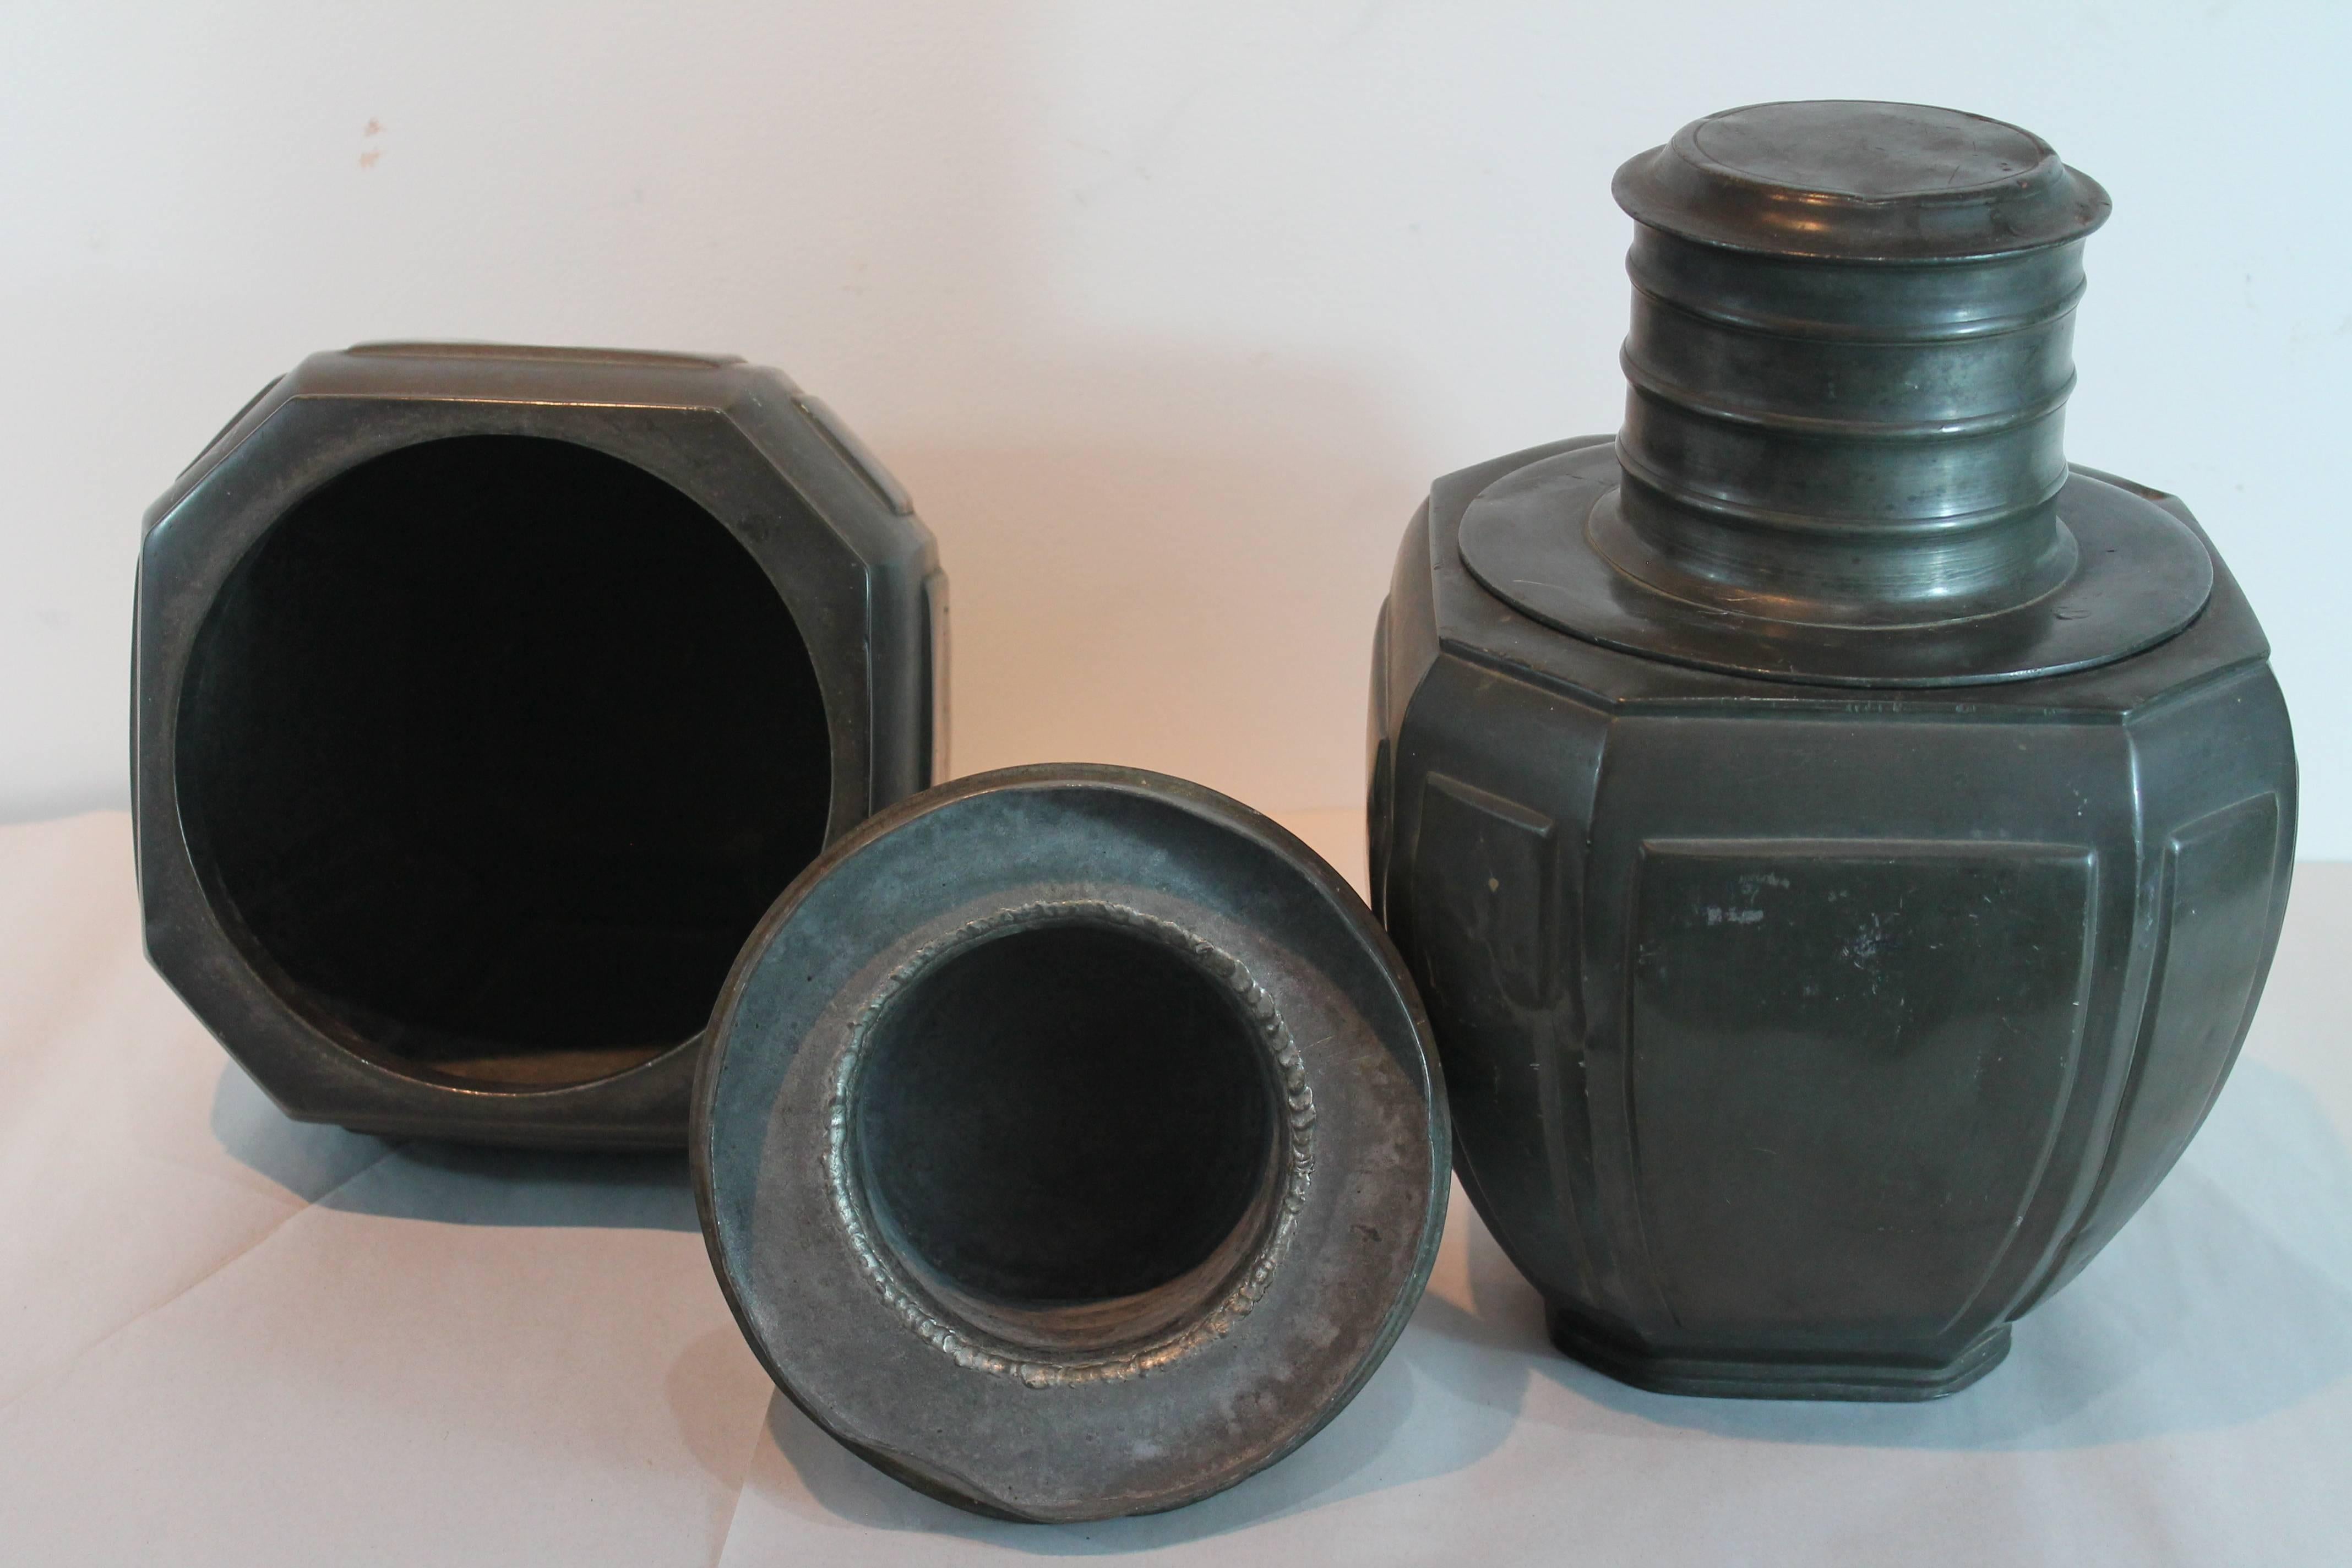 Pair of Large 19th Century Pewter Chinese Tea Cannisters In Good Condition For Sale In 3 Oaks, MI